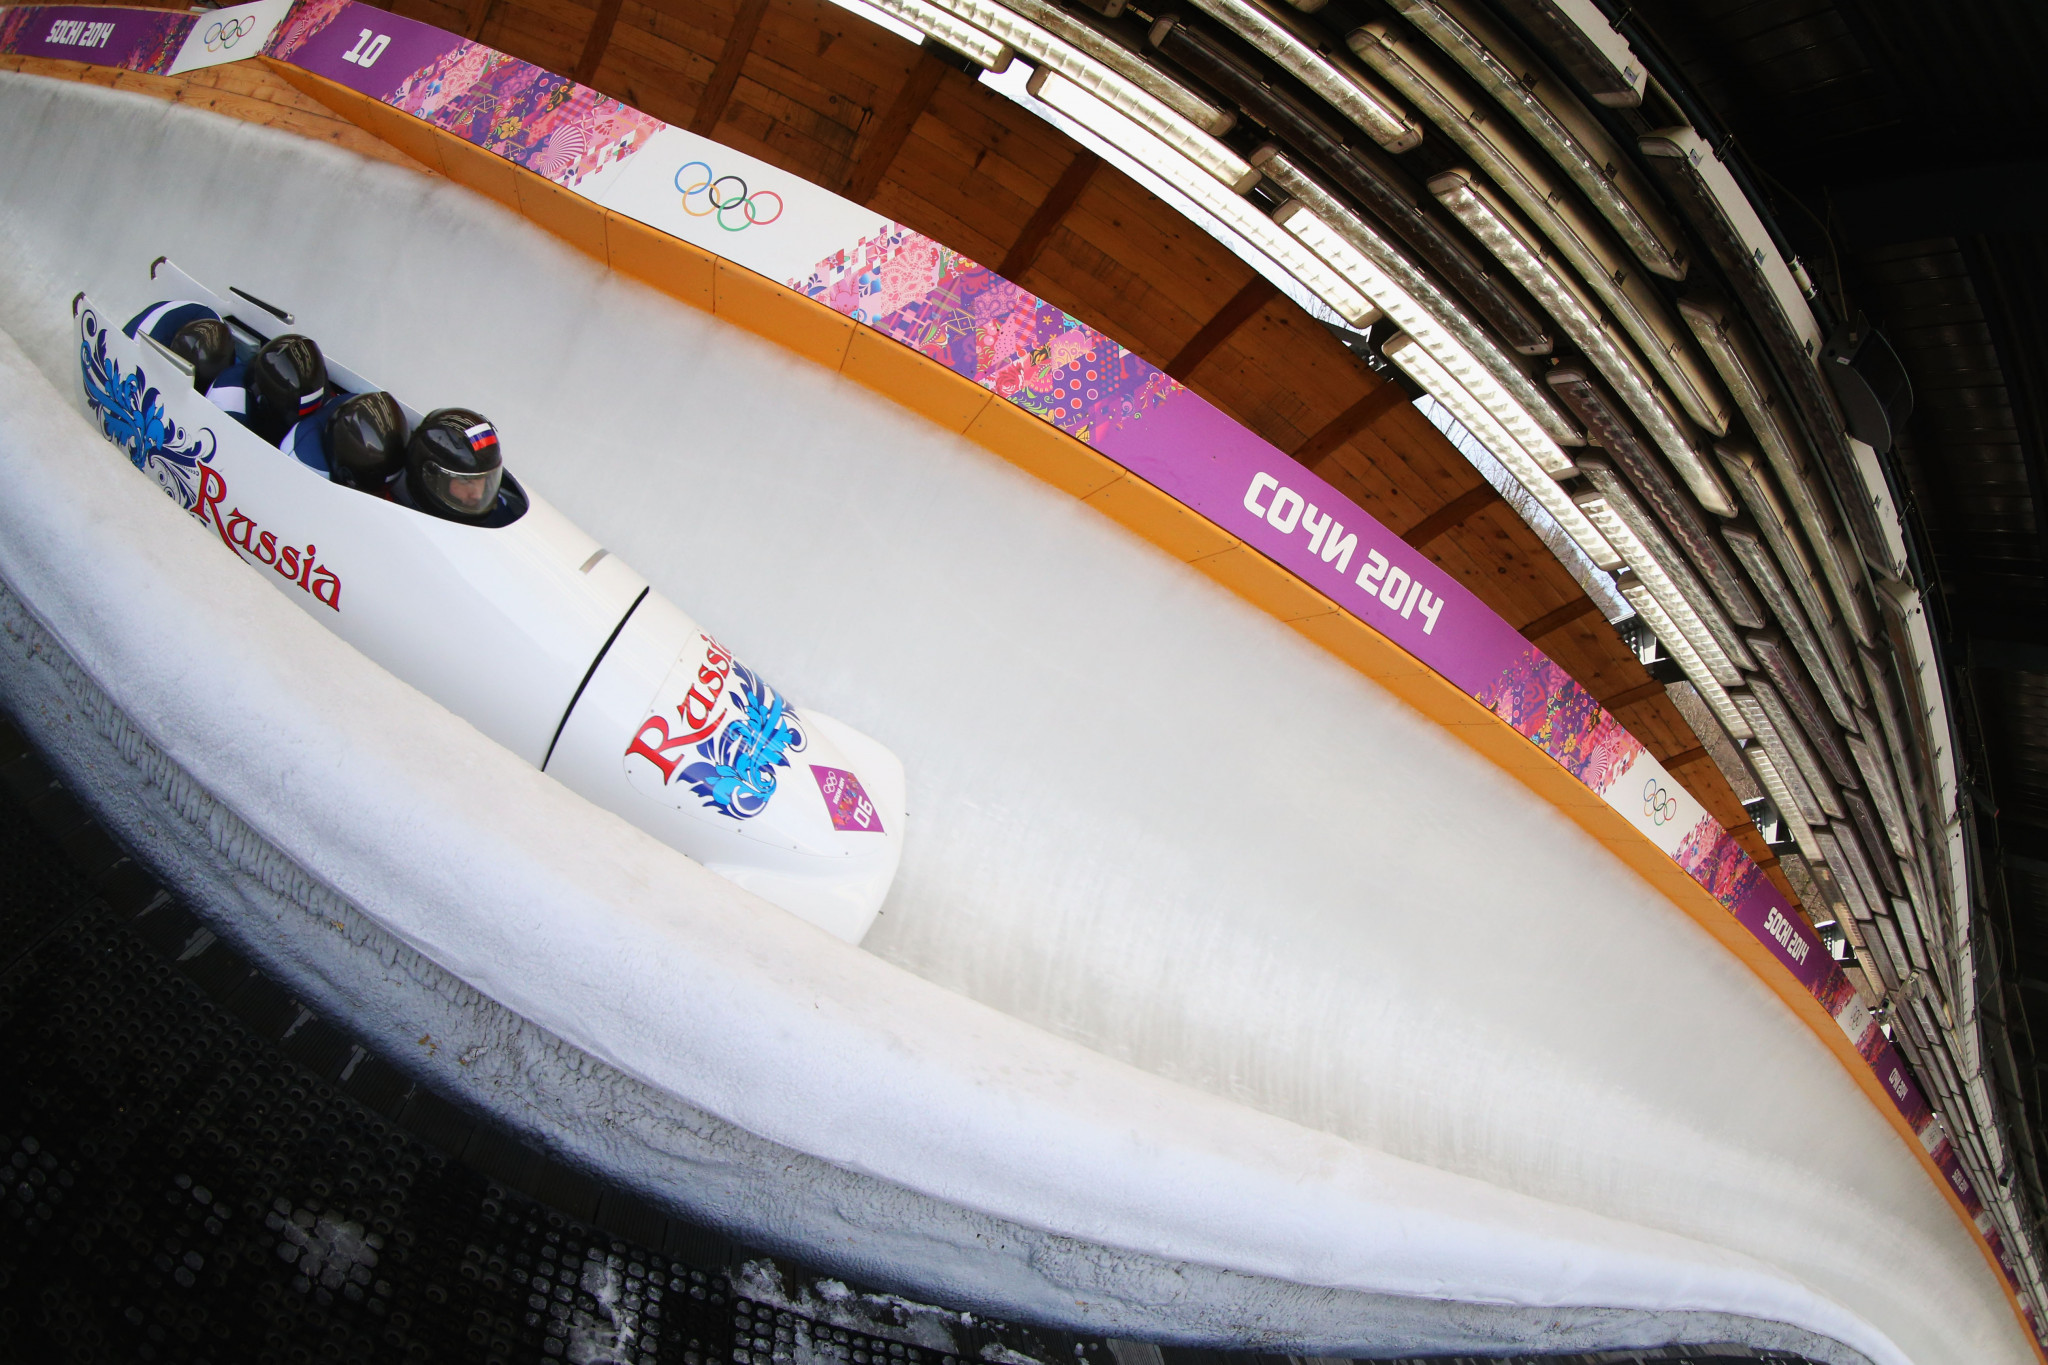 Russia asked to change design of sleds and bobsleigh kit for Pyeongchang 2018 by IOC